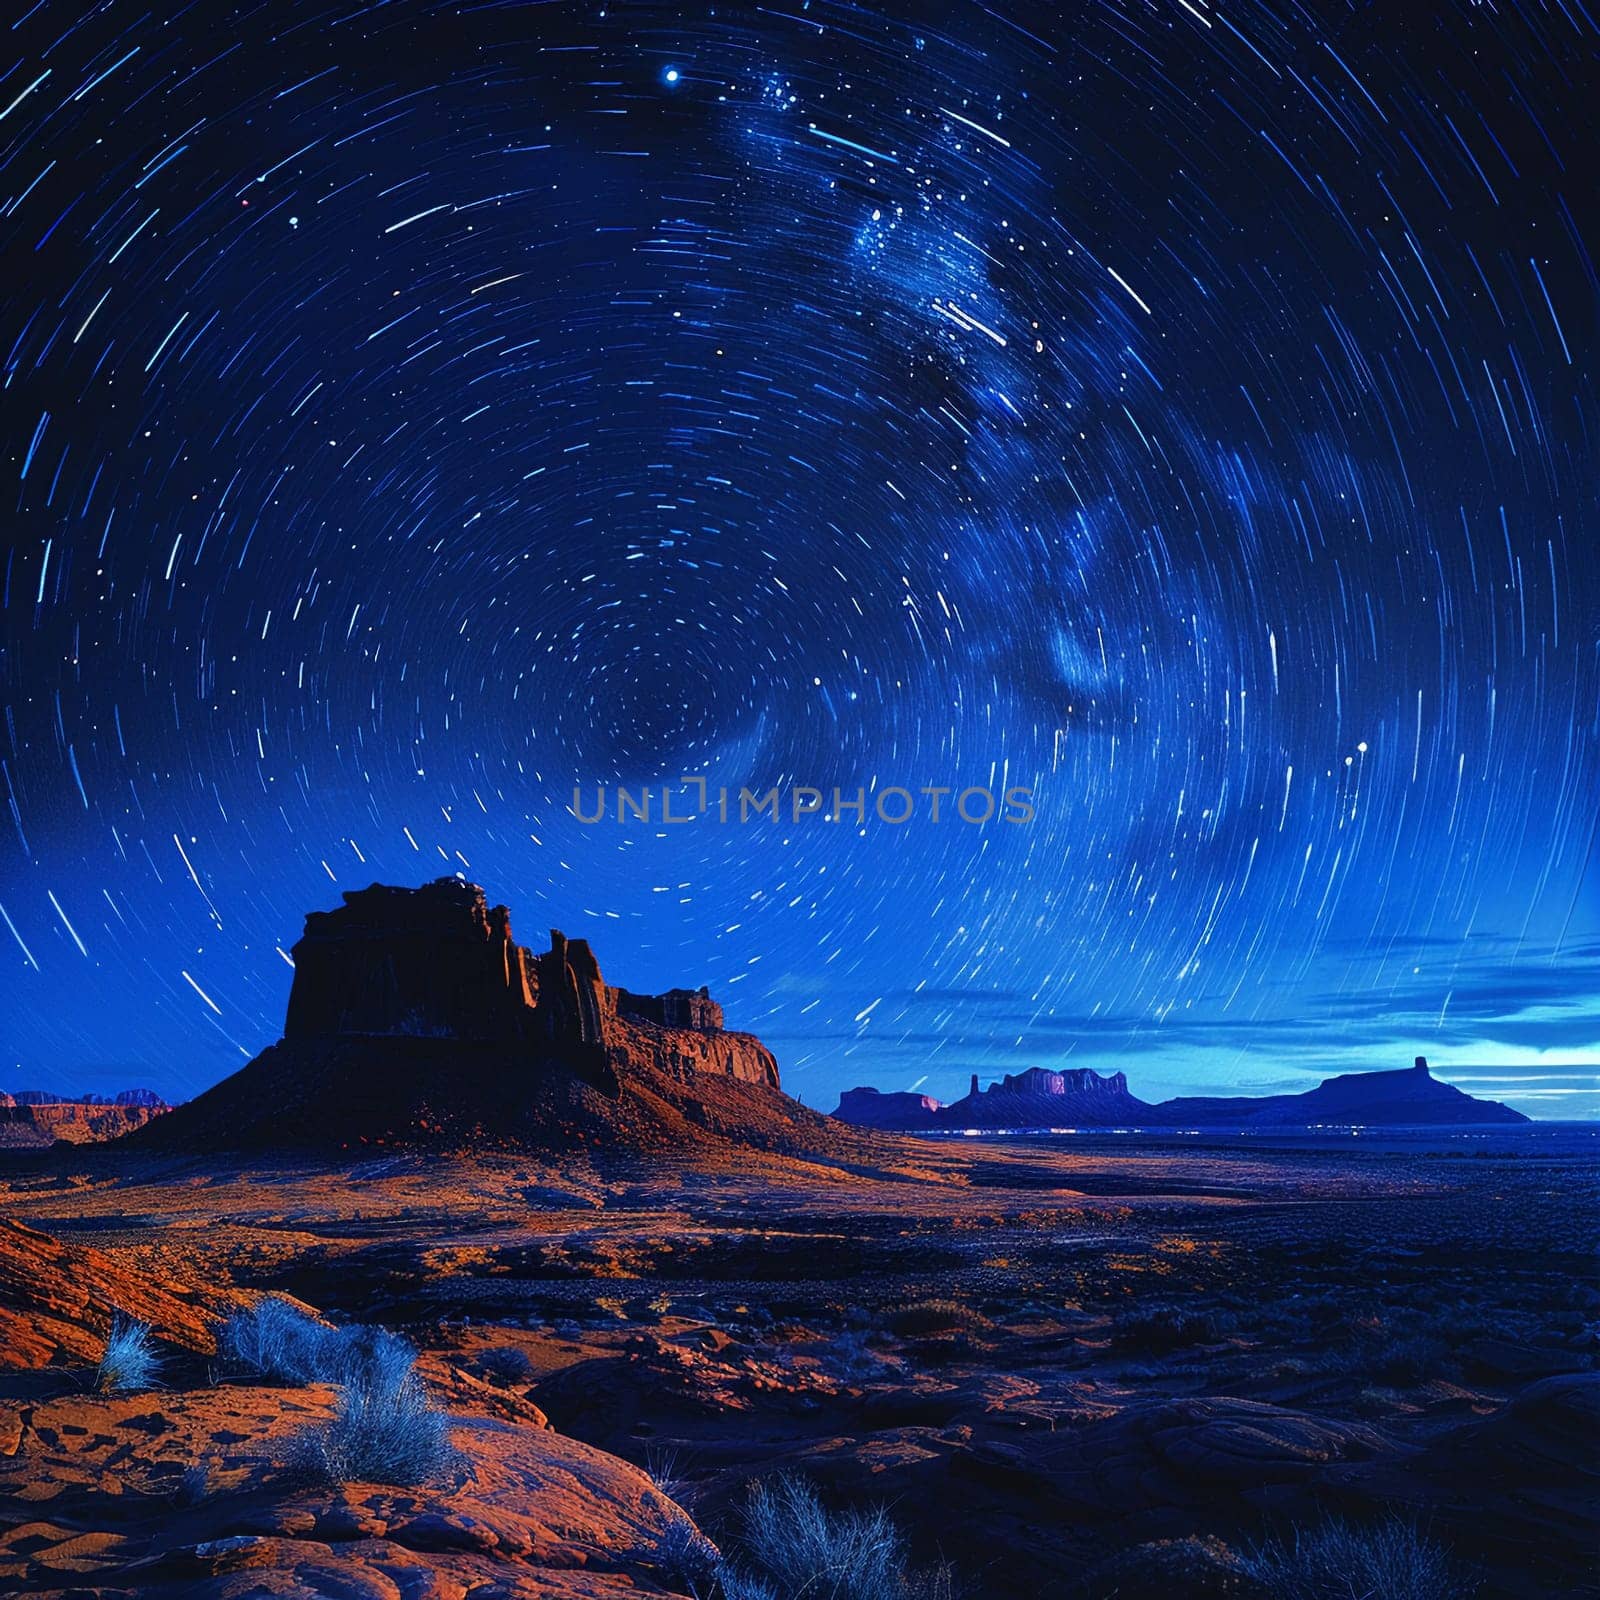 Stars trailing in the night sky over a silent desert, illustrating the passage of time.